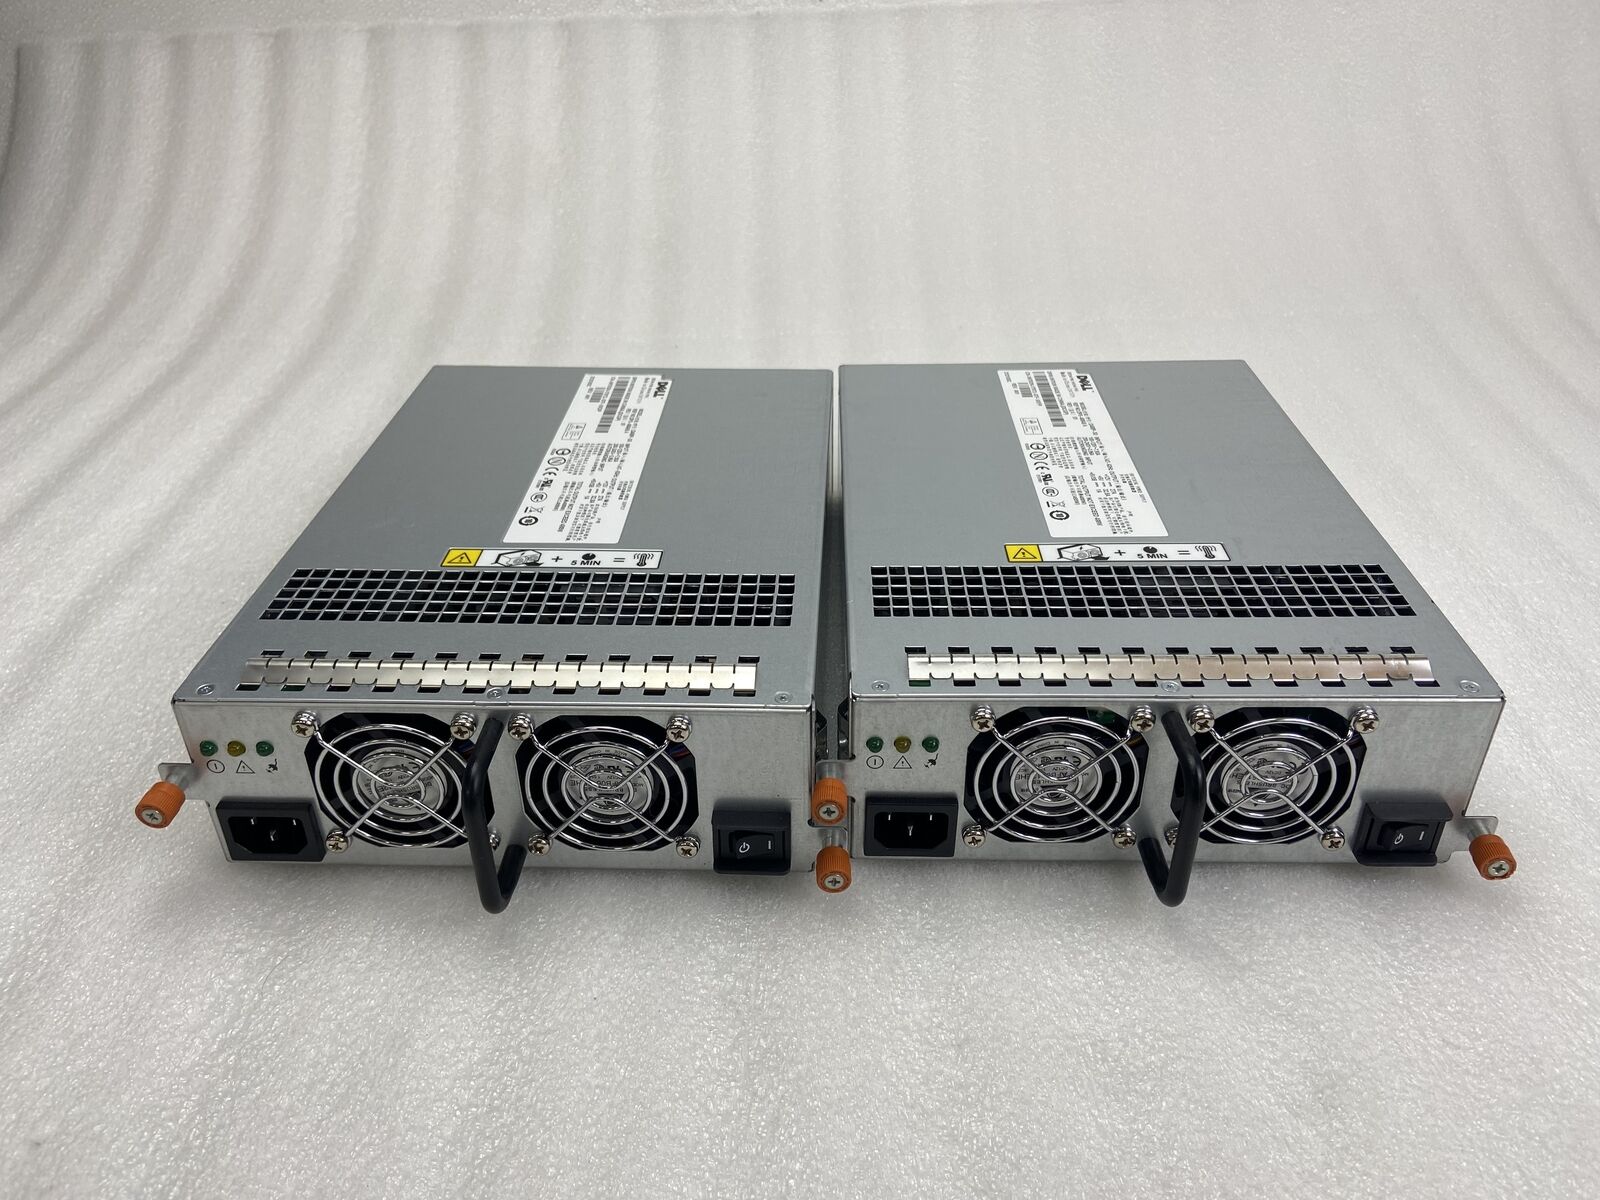  Lot of 2 Dell Powervault 488W Power Supply MD1000 3000 H703N DPS-488AB D488P-S0